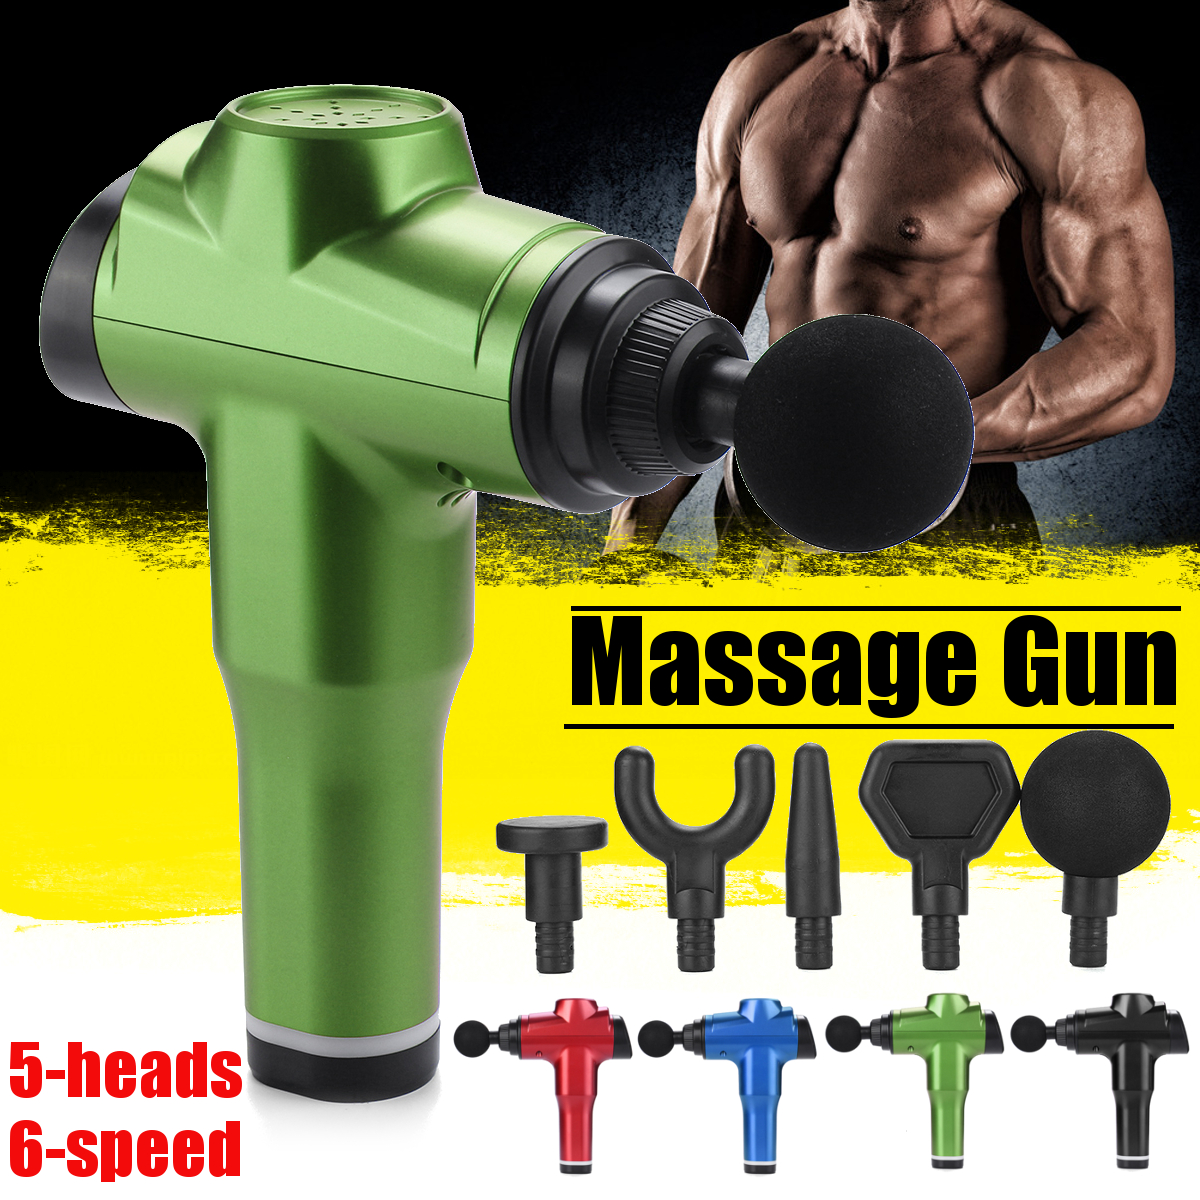 Recahrgable-6-Speed-5-Head-Fascia-Massager-Muscle-Relaxation-Massager-Gym-High-Frequency-Vibration-P-1679196-1